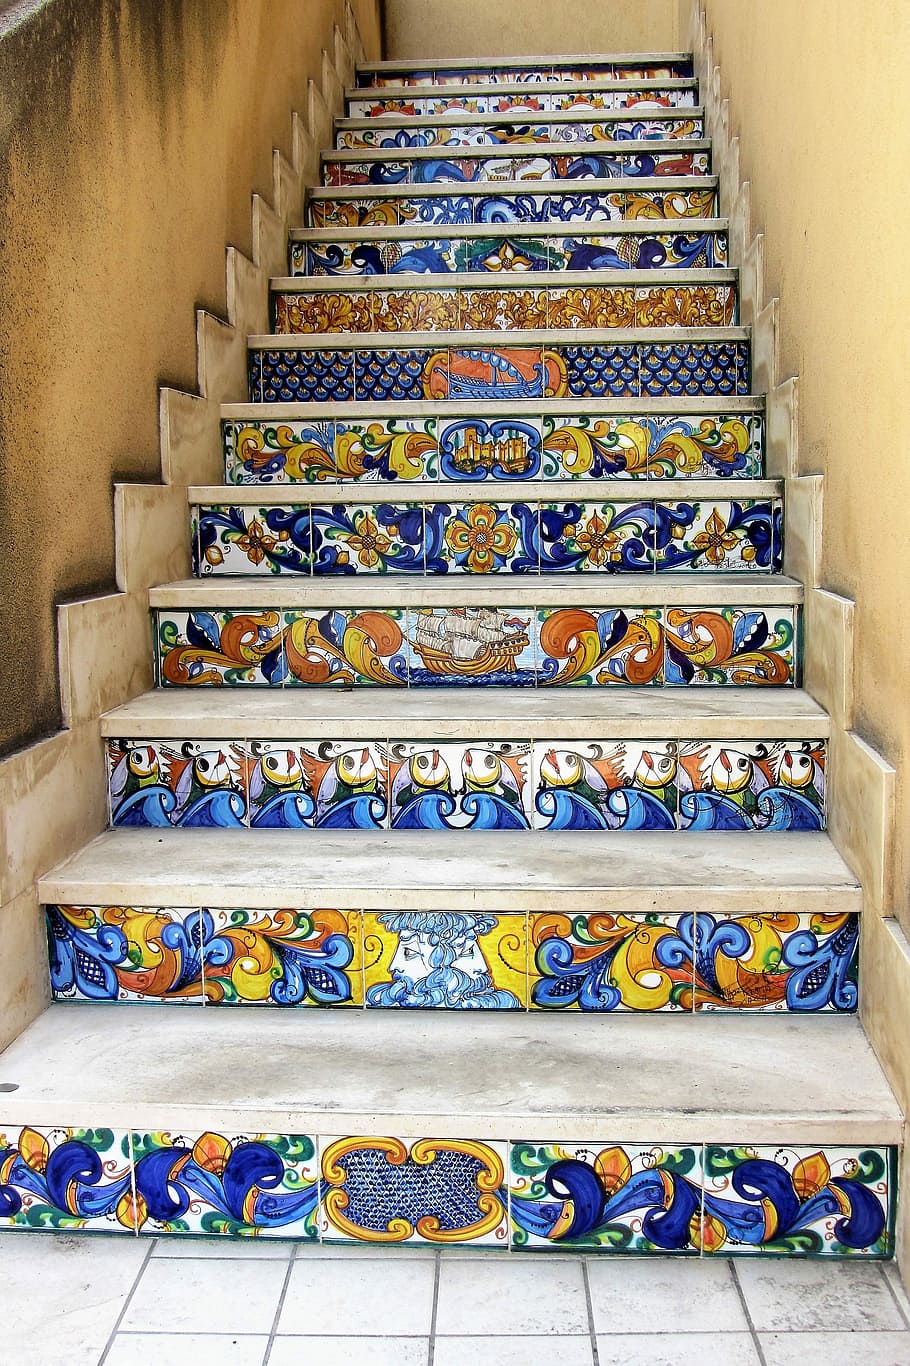 sicily, italy, trap, act, mosaic, tiles, staircase, in a row, indoors, architecture